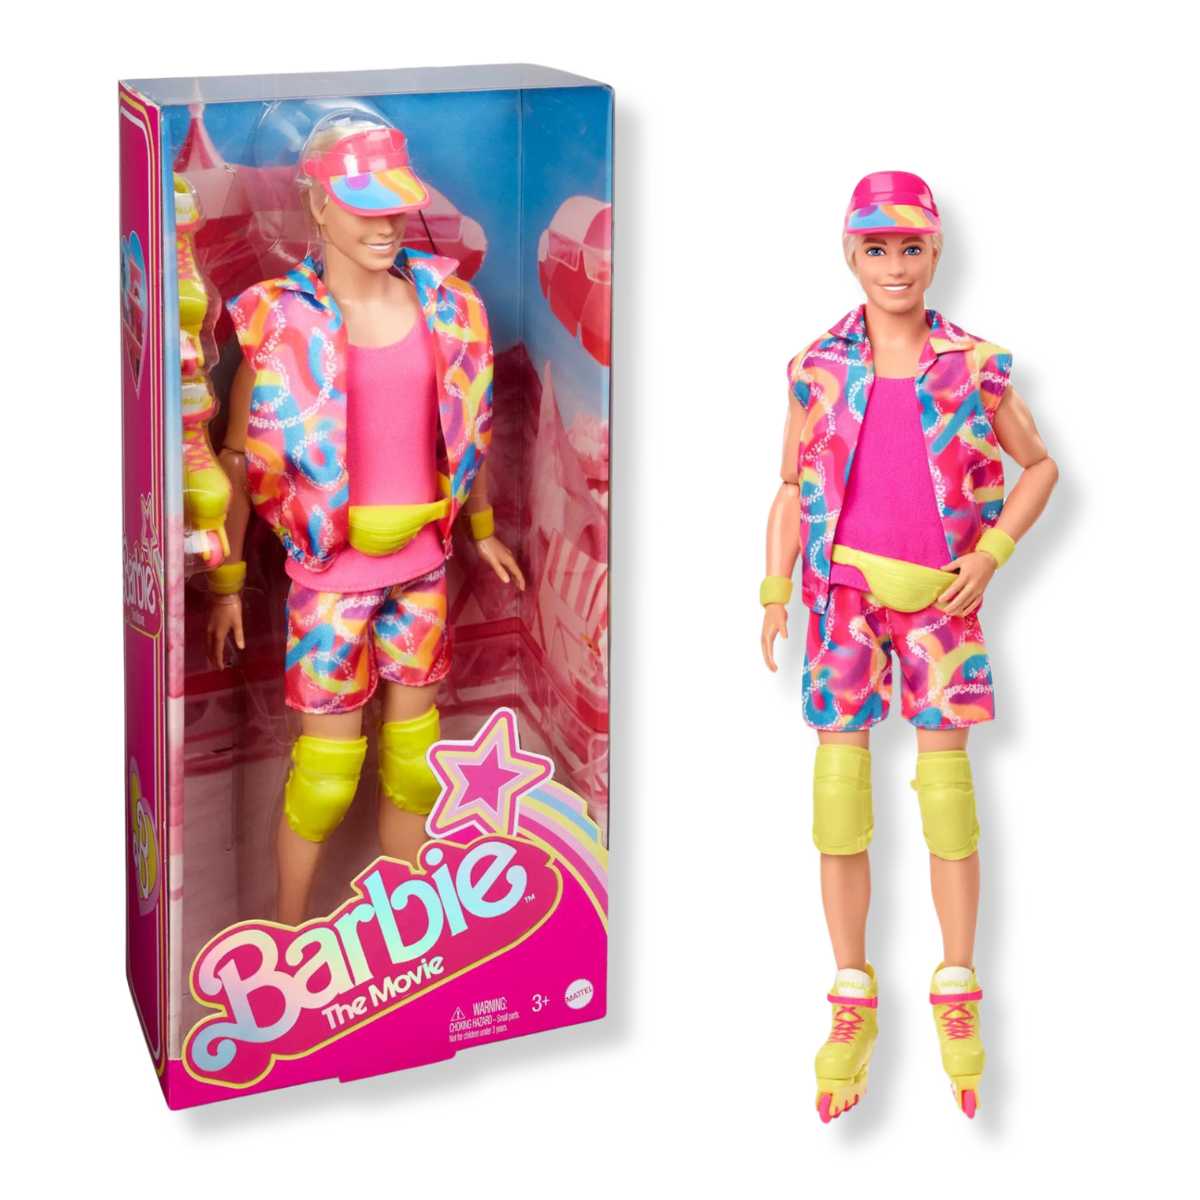 Barbie The Movie Roller Skating Barbie And Ken 2 Doll Bundle - Simon's Collectibles